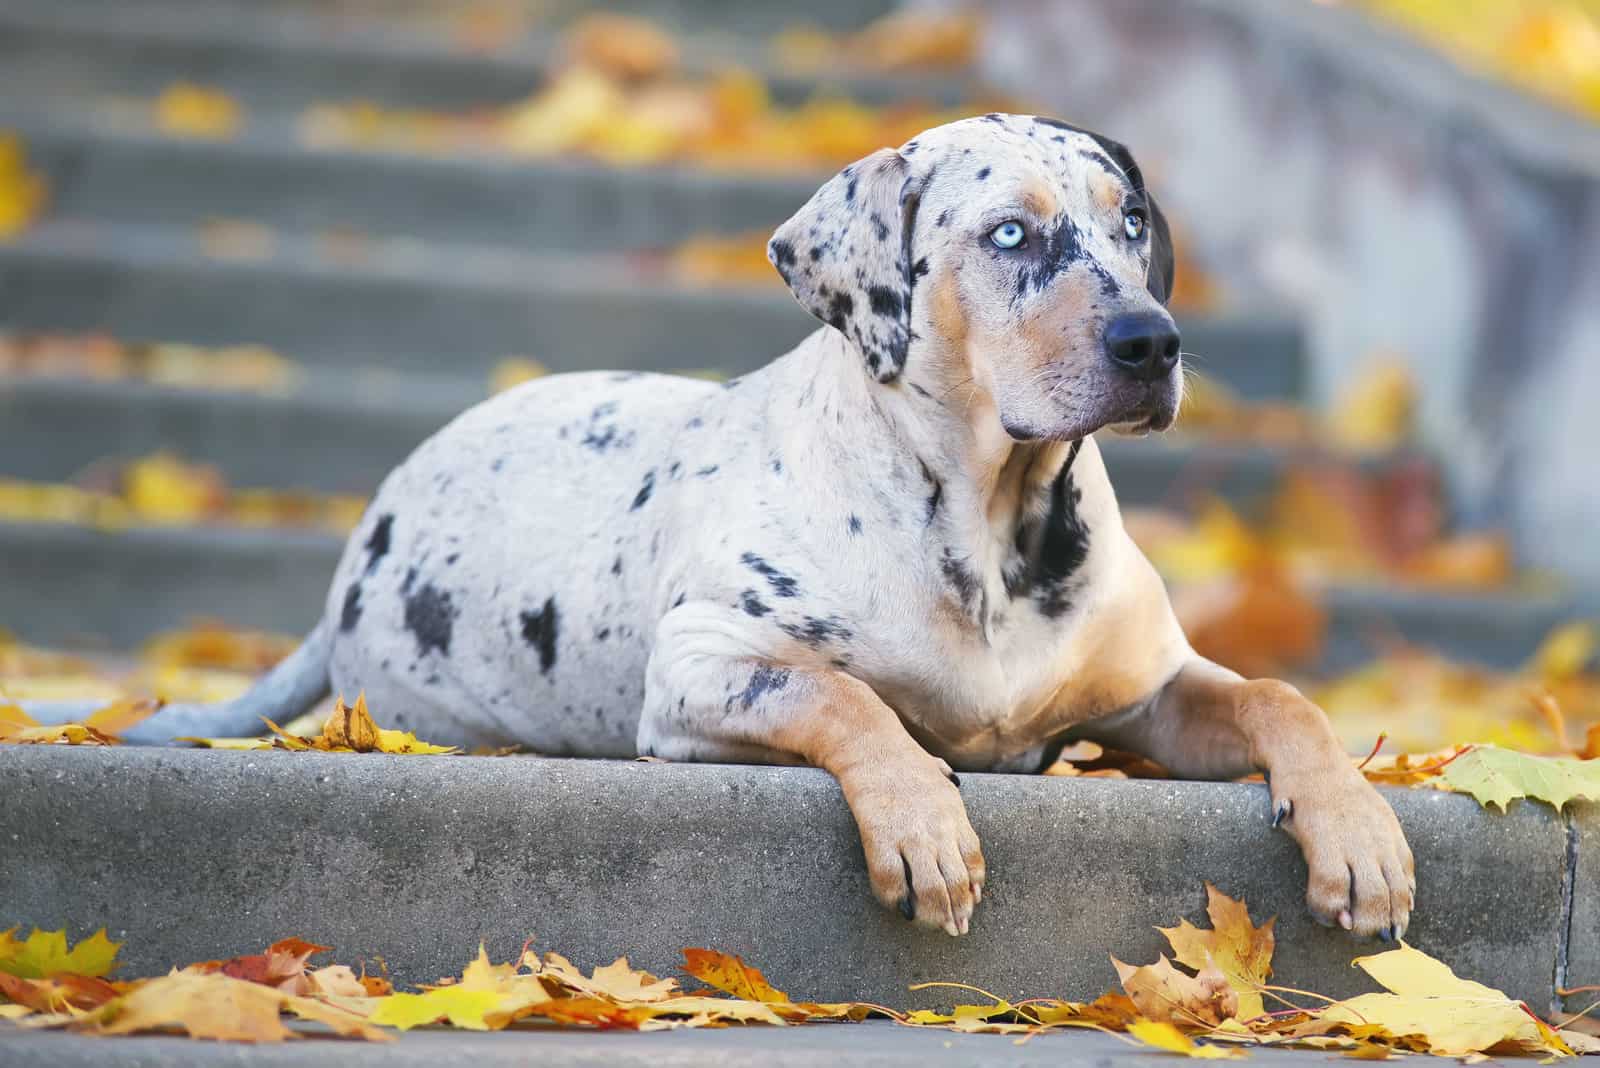 Catahoula lies on the stairs